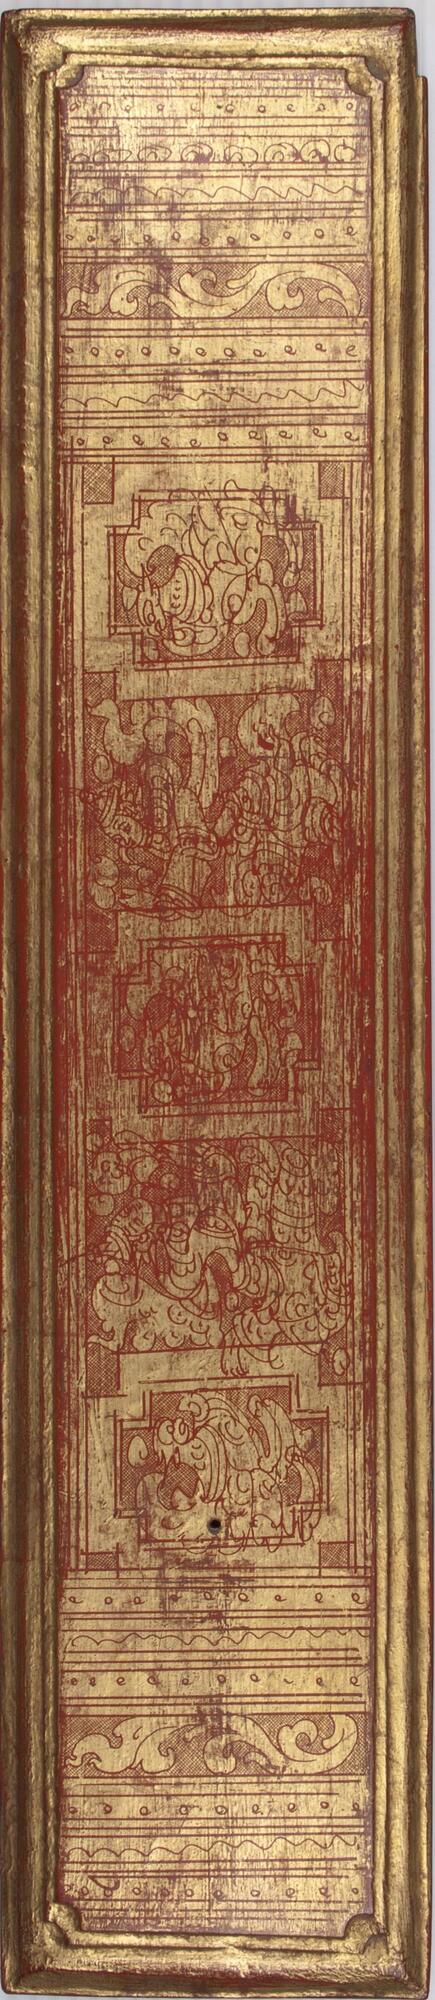 This prayer book consists of 20 pages written on the front and back in the Myanmar language. It is decorated in golds and reds with black text.